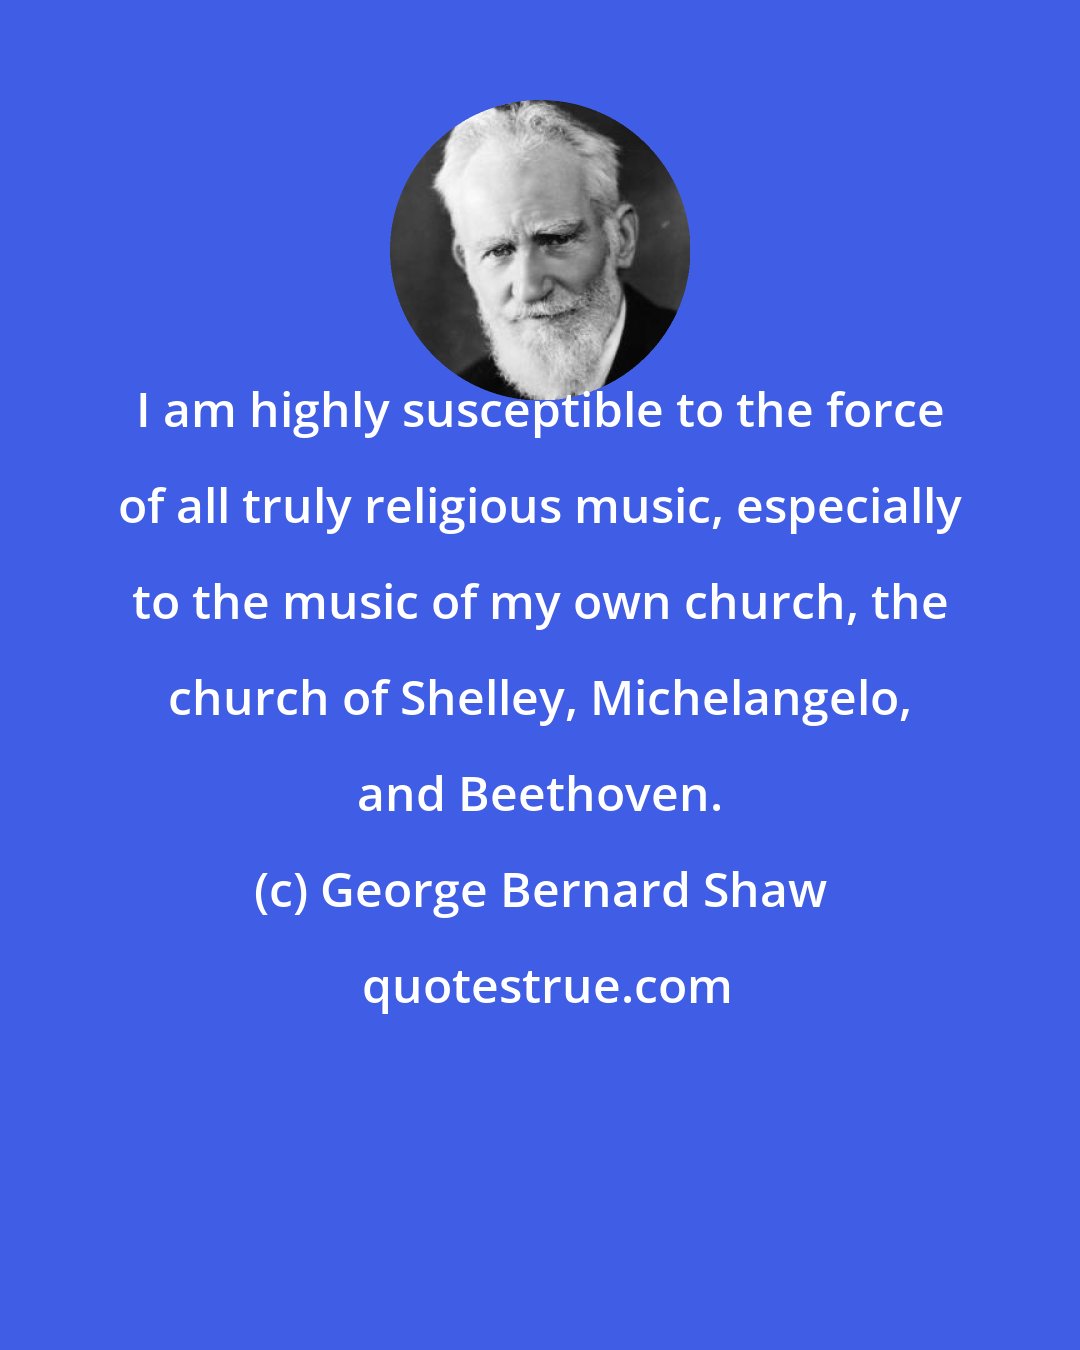 George Bernard Shaw: I am highly susceptible to the force of all truly religious music, especially to the music of my own church, the church of Shelley, Michelangelo, and Beethoven.